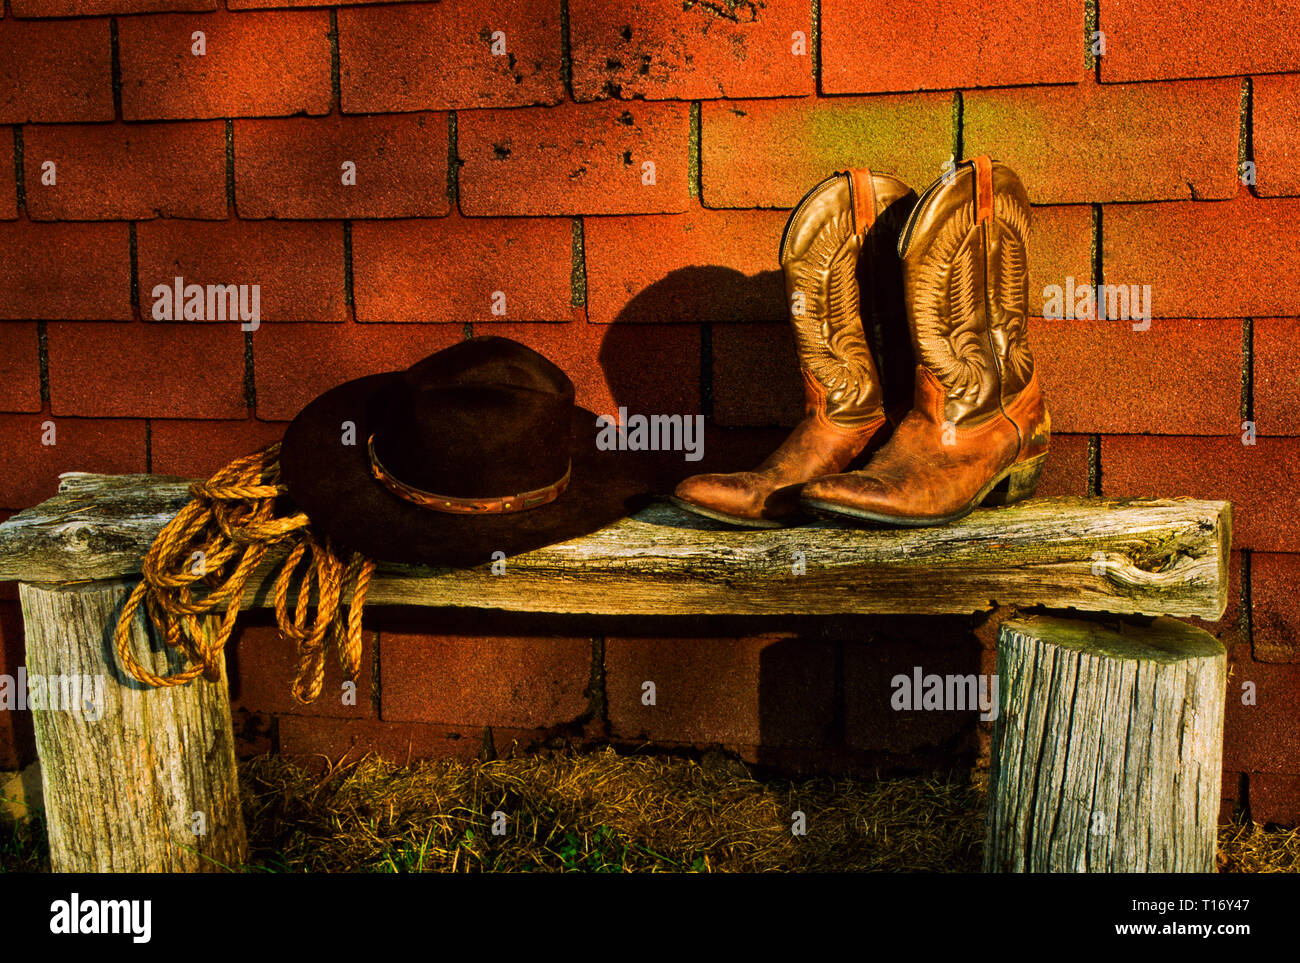 old akubra hat and R M Williams boots outback Australia dsc 2359